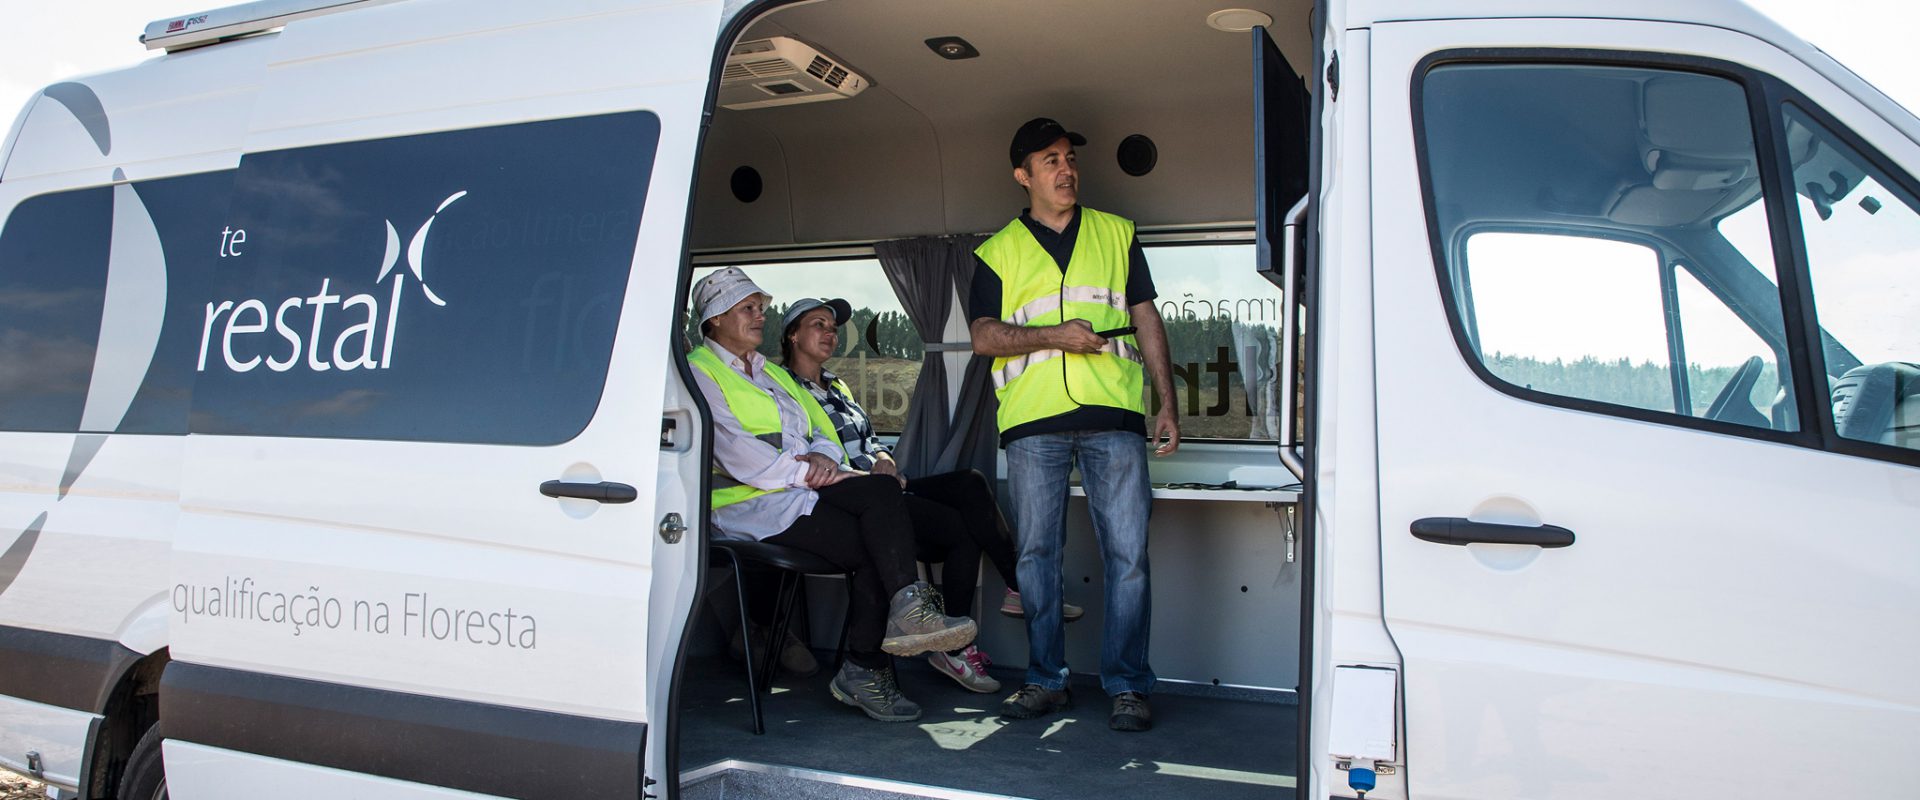 The van is equipped with a sound and video system which makes it easier to present information to employees